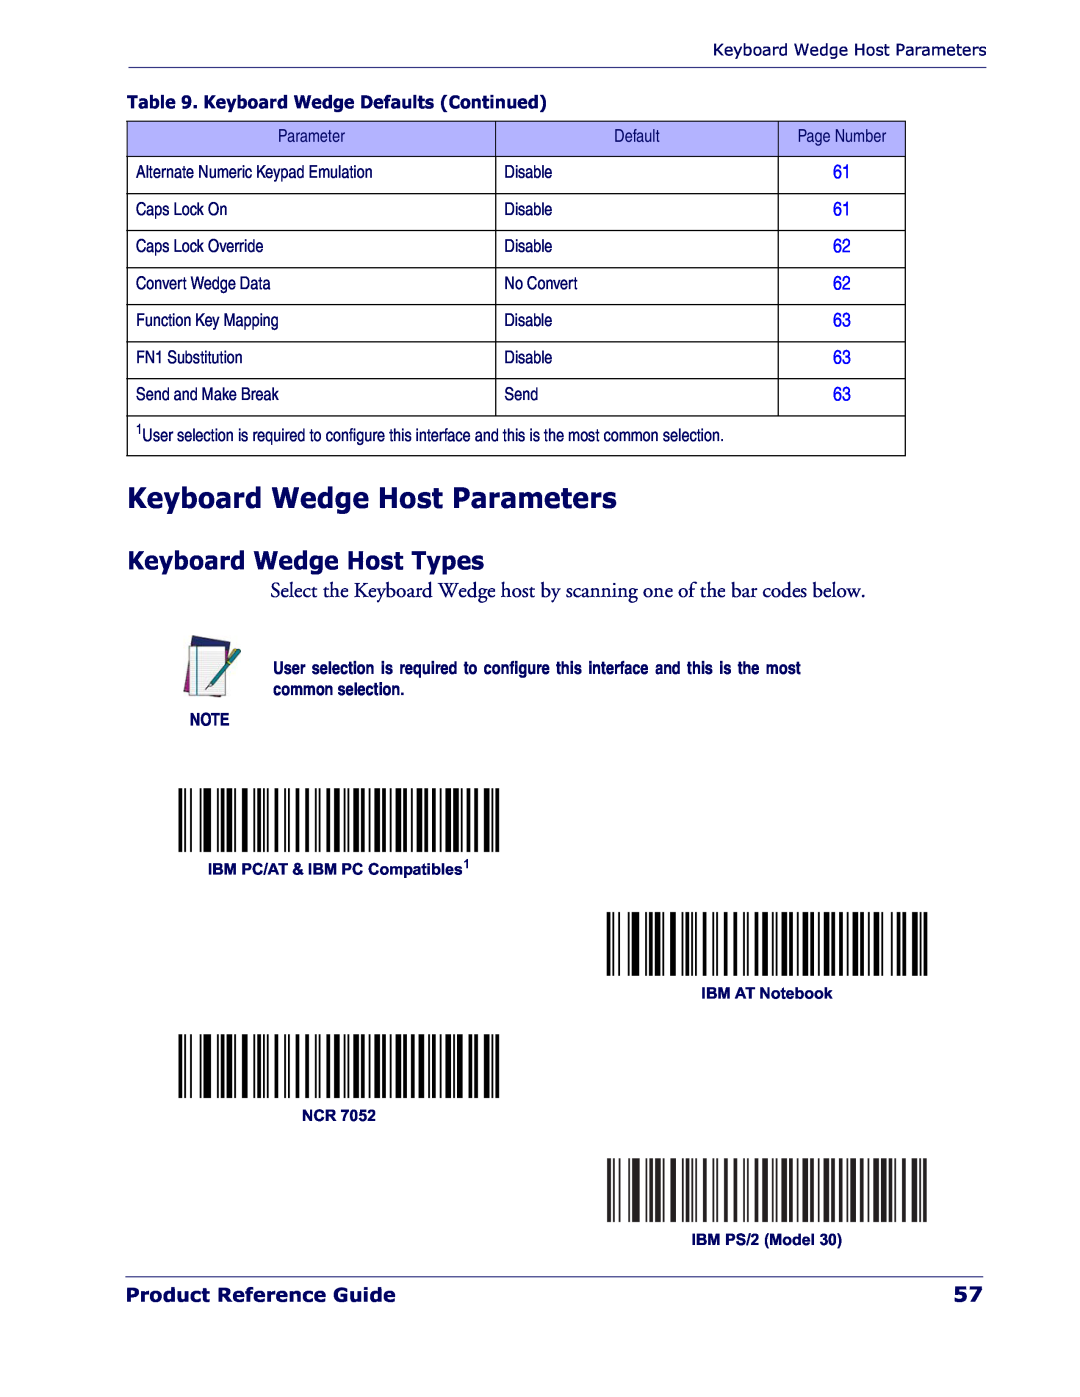 Datalogic Scanning QD 2300 manual Keyboard Wedge Host Parameters, Keyboard Wedge Host Types, Product Reference Guide 